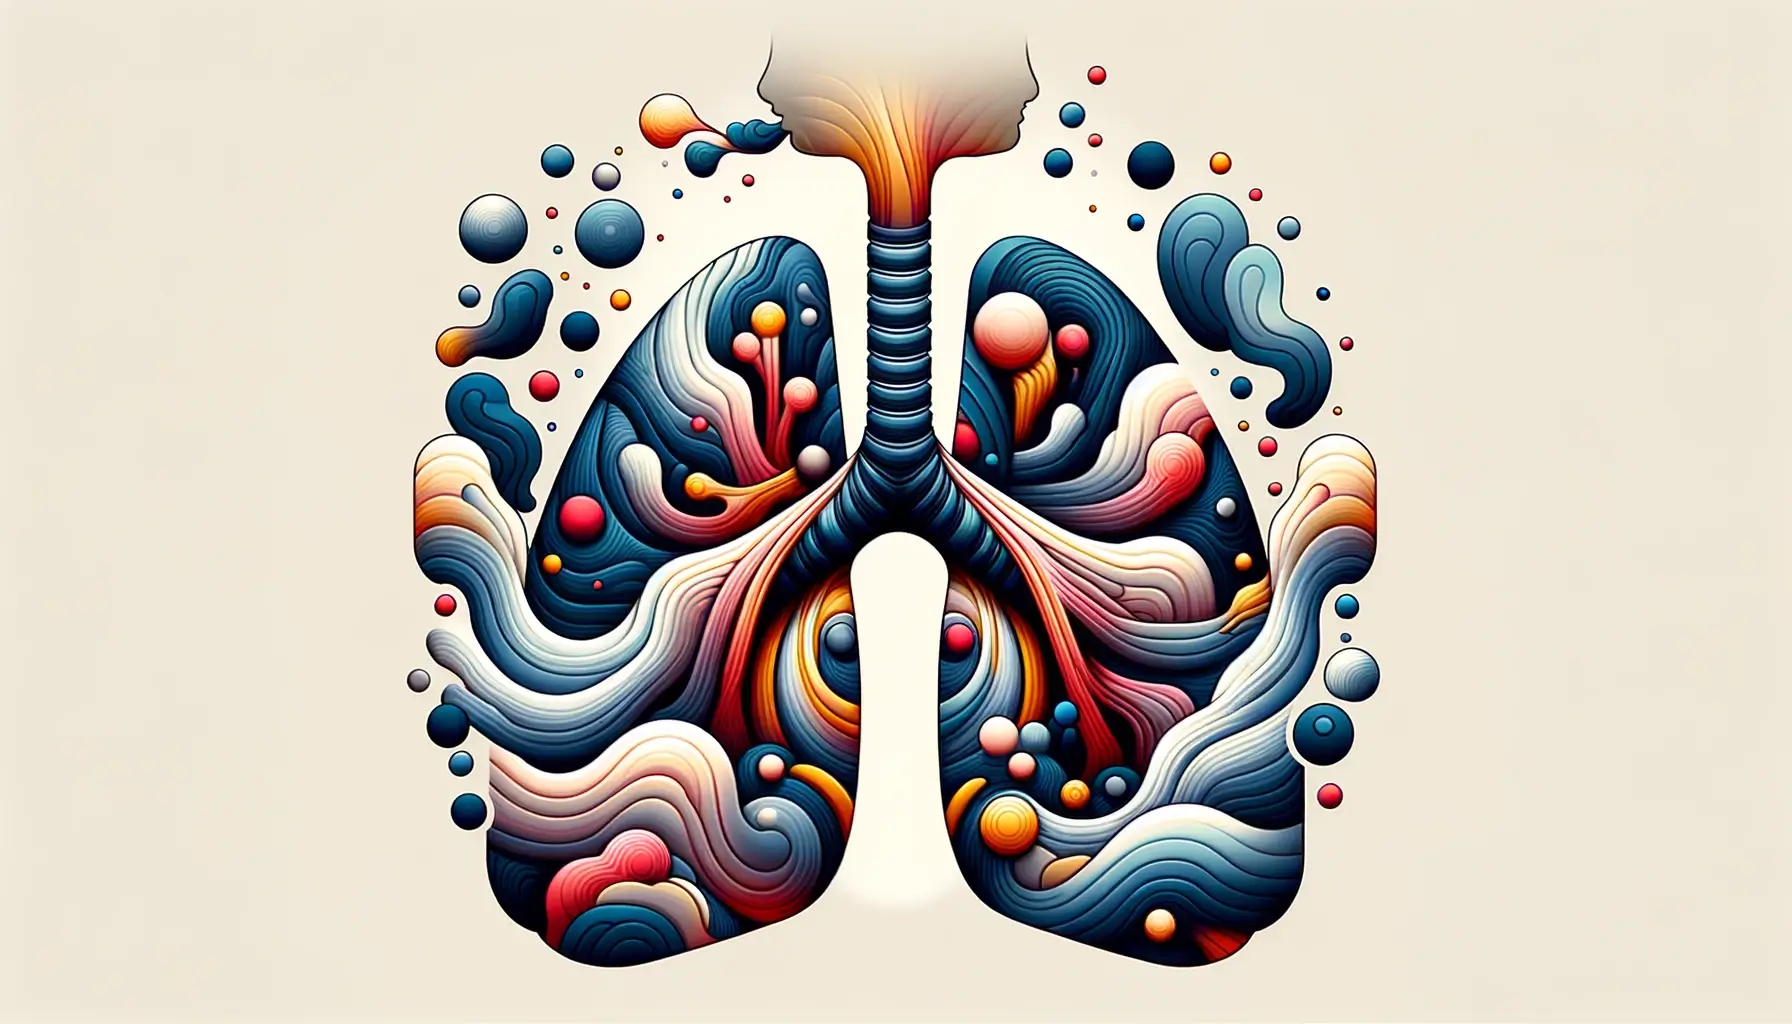 Abstract depiction of respiratory irritation from Delta 8 vape use, highlighting discomfort.